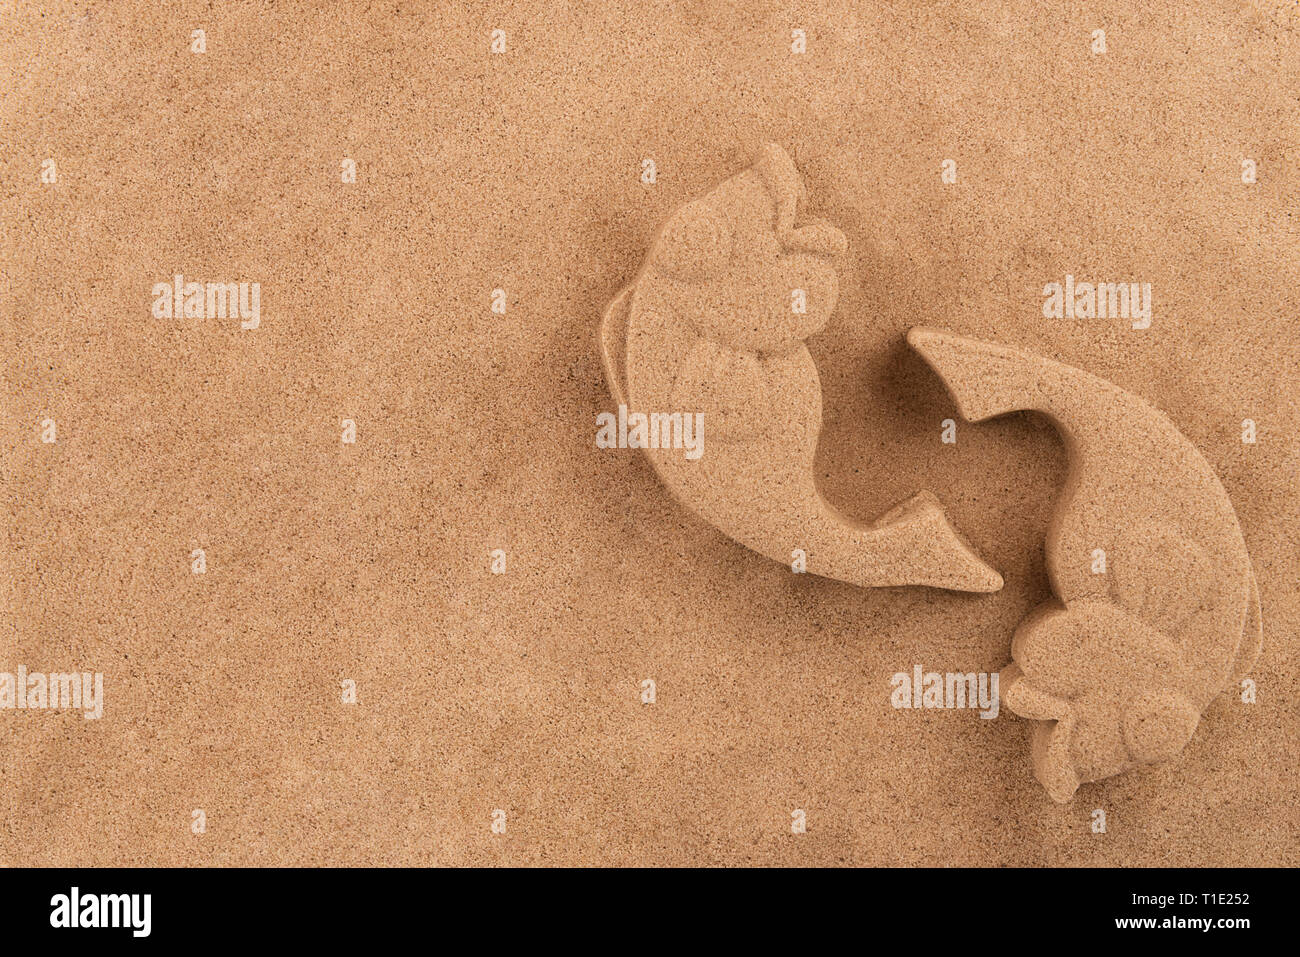 Ying yang sand fishes, sea sand in background. Copy space. Stock Photo